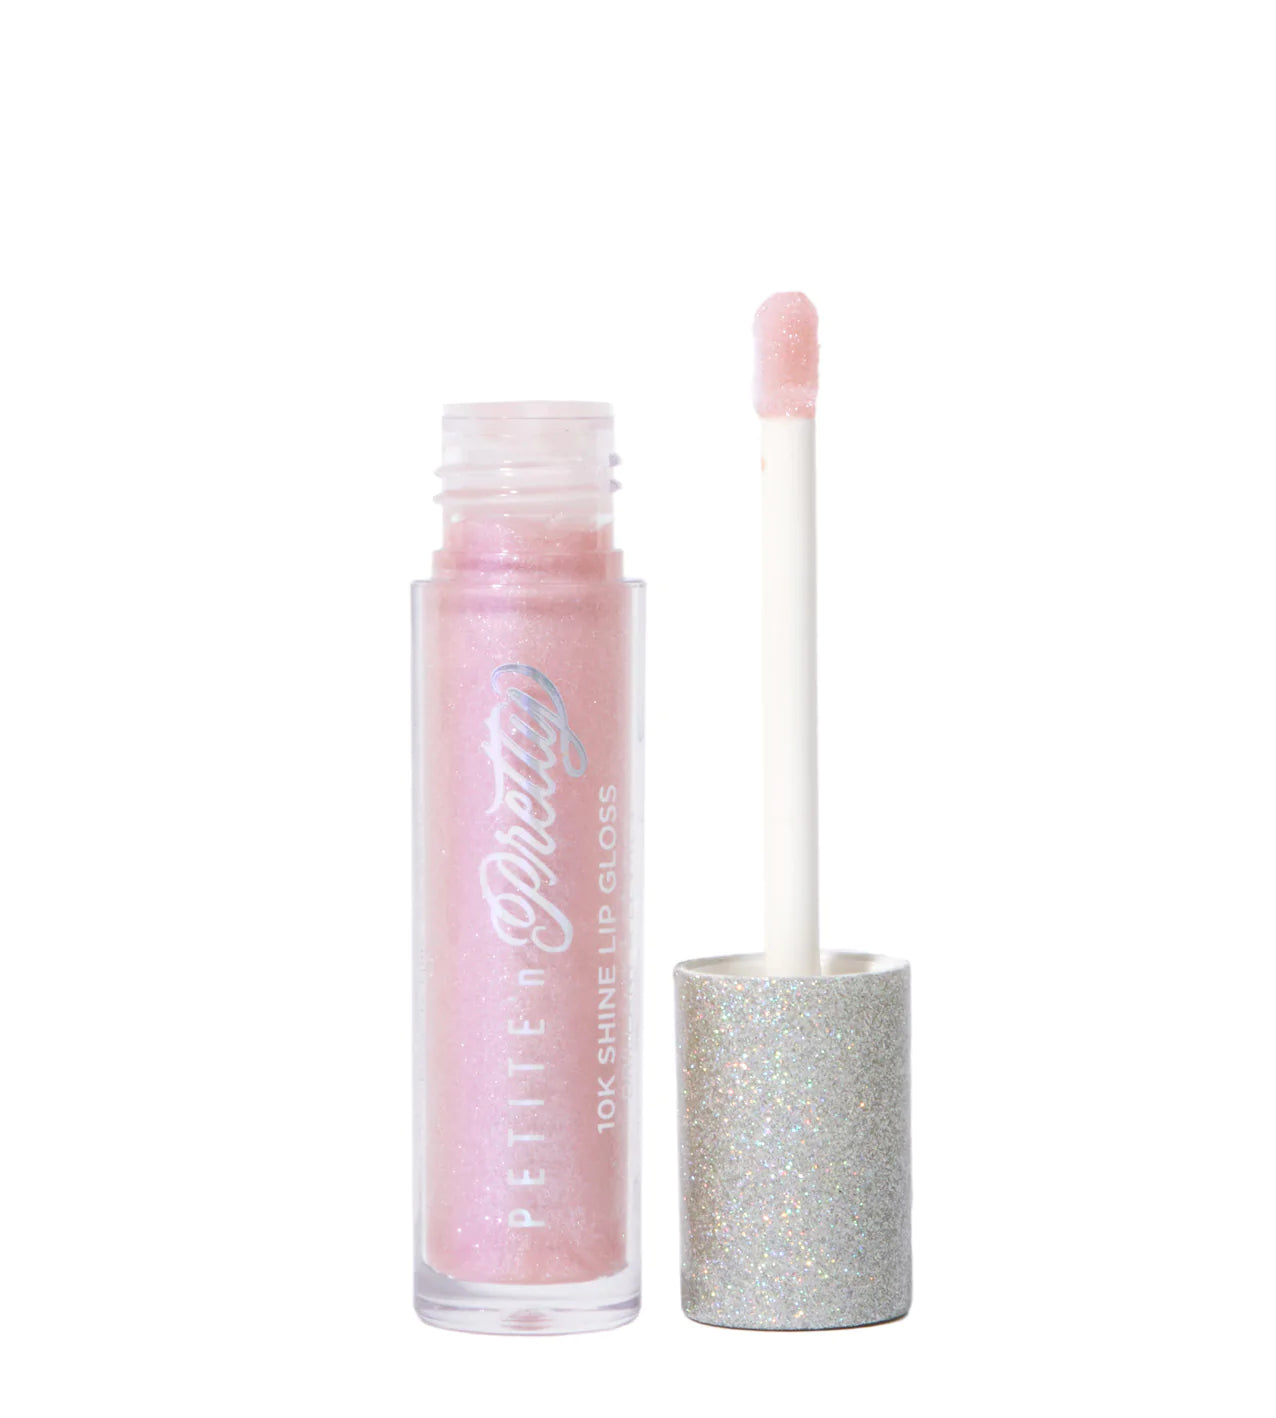 Clearly Cute Makeup Set - Petite 'n Pretty - A beauty brand leading the  Sparkle Revolution!